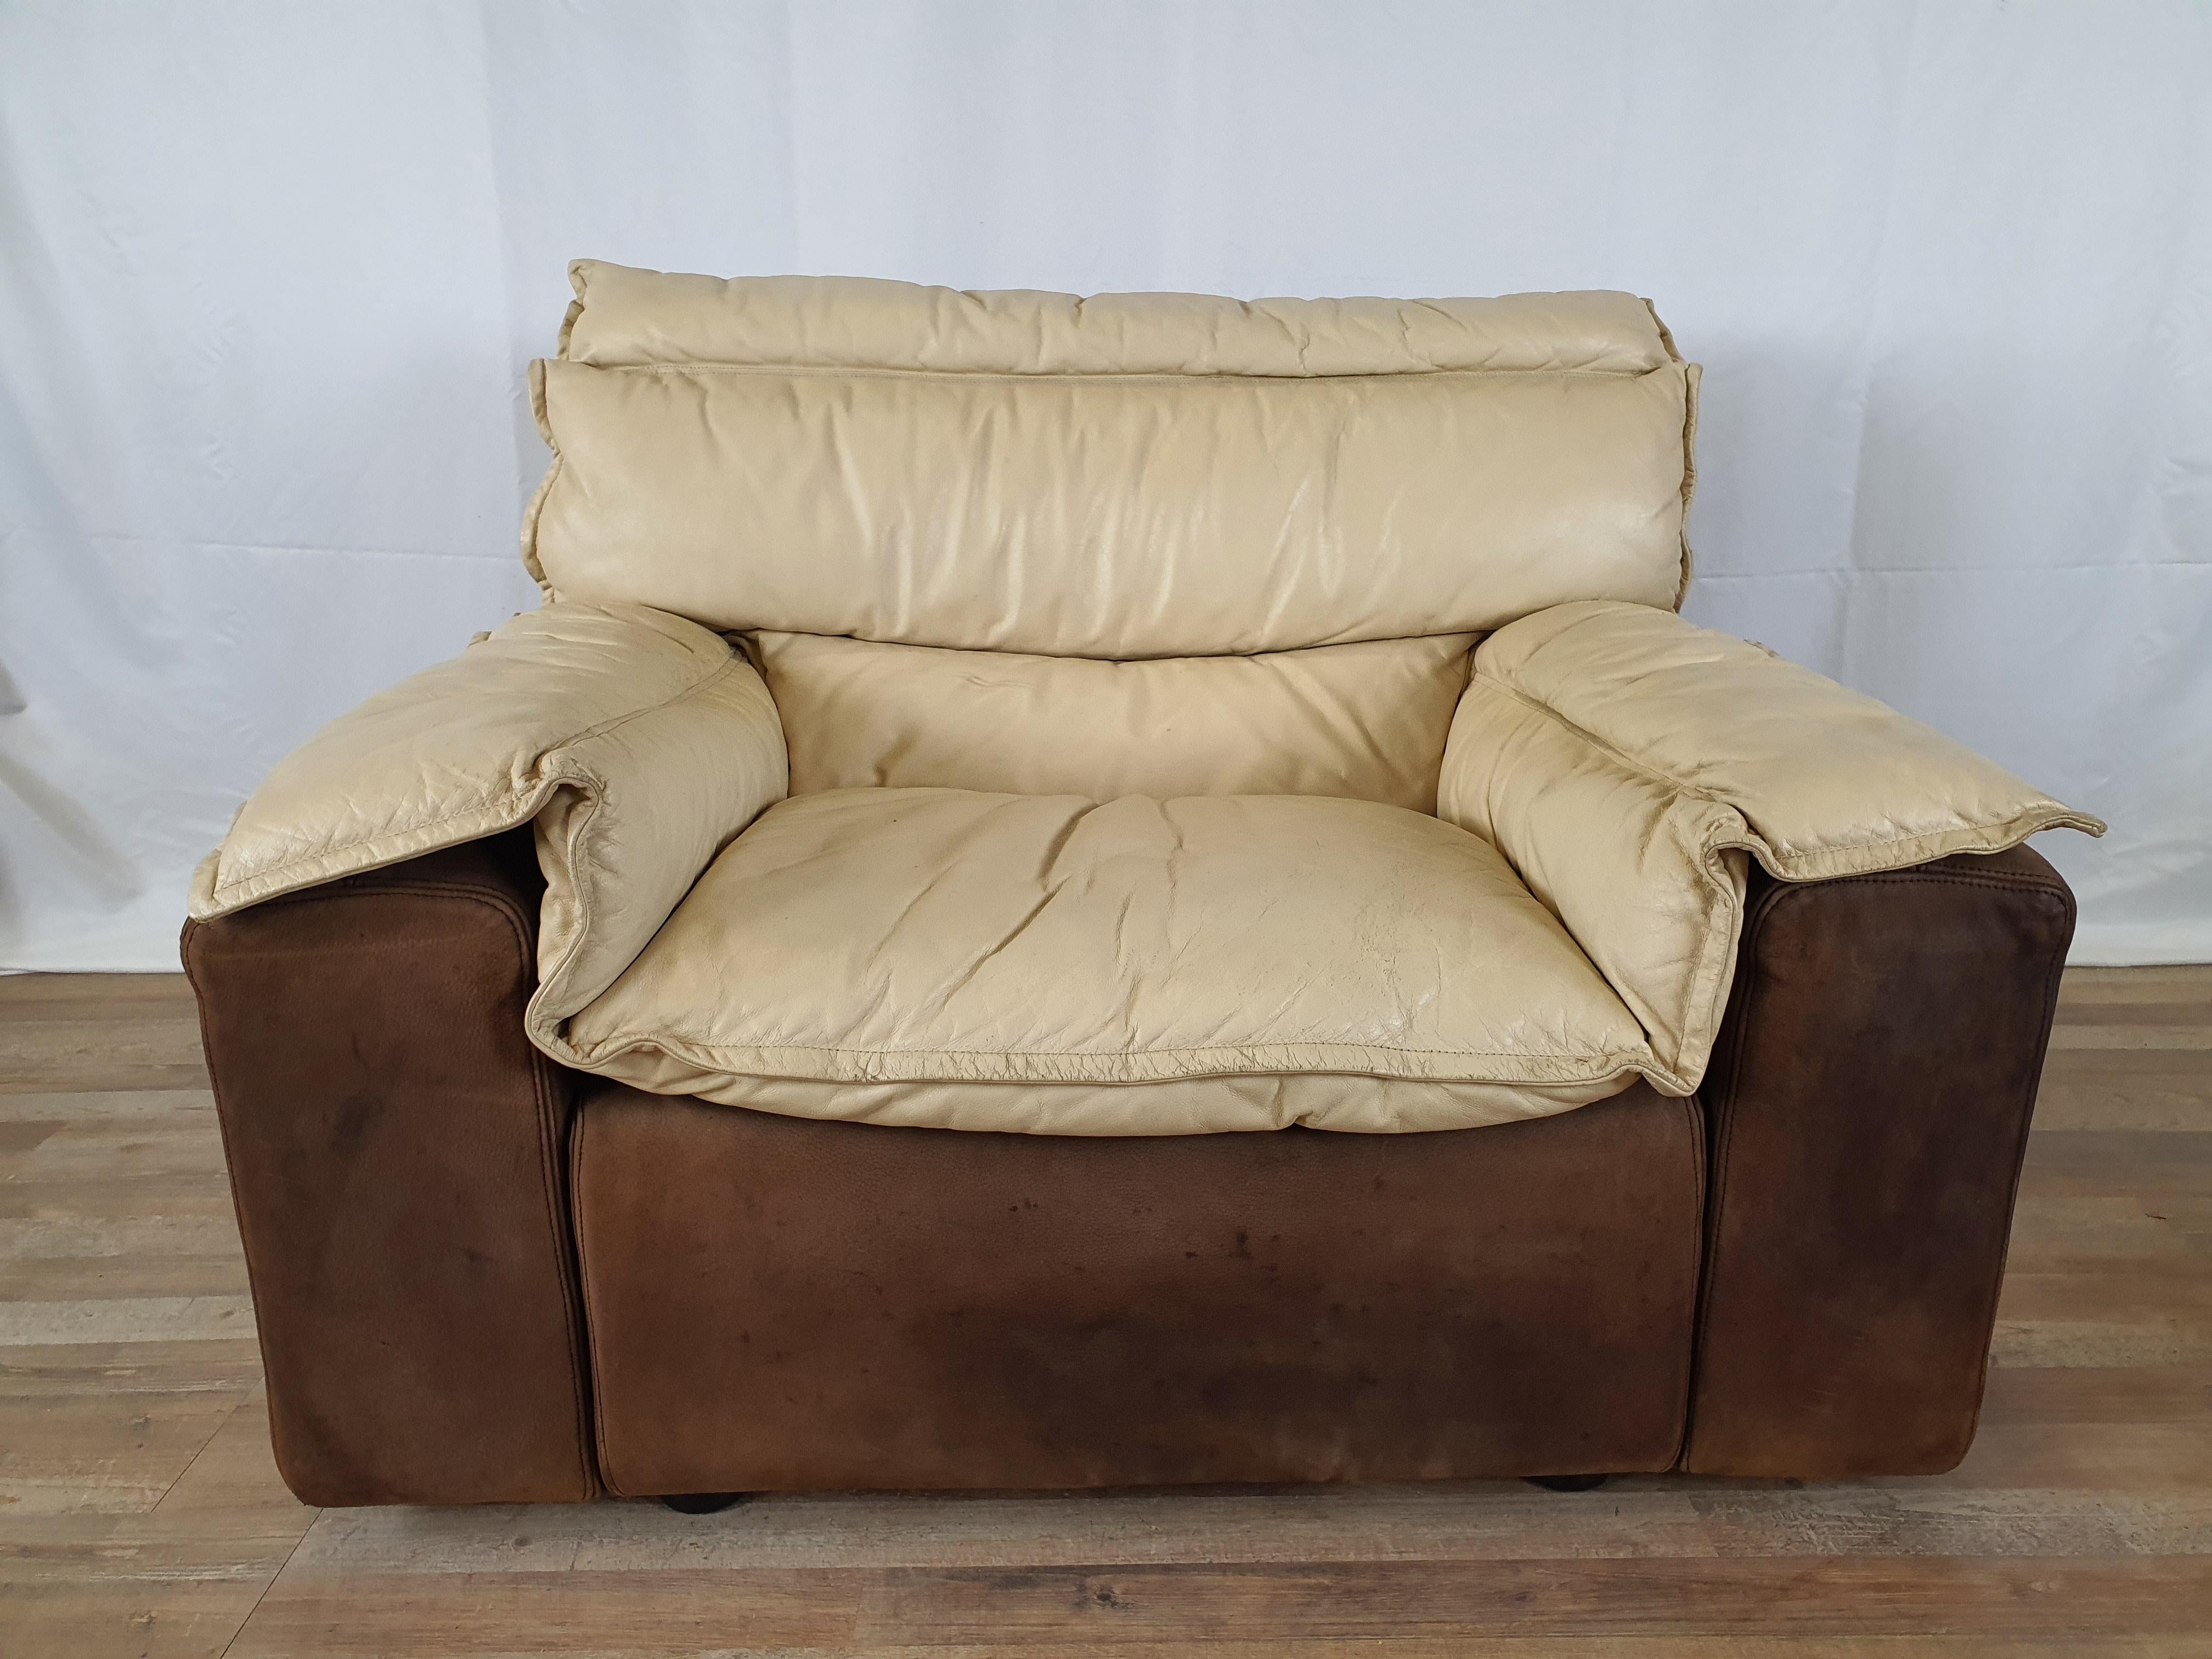 Comfortable and modern vintage 70s armchair, Italian production in leather and suede.

Fine and elegant design, it lends itself to any occasion and in any furnishing context, from Vintage to Antique.

The armchair is in good condition with